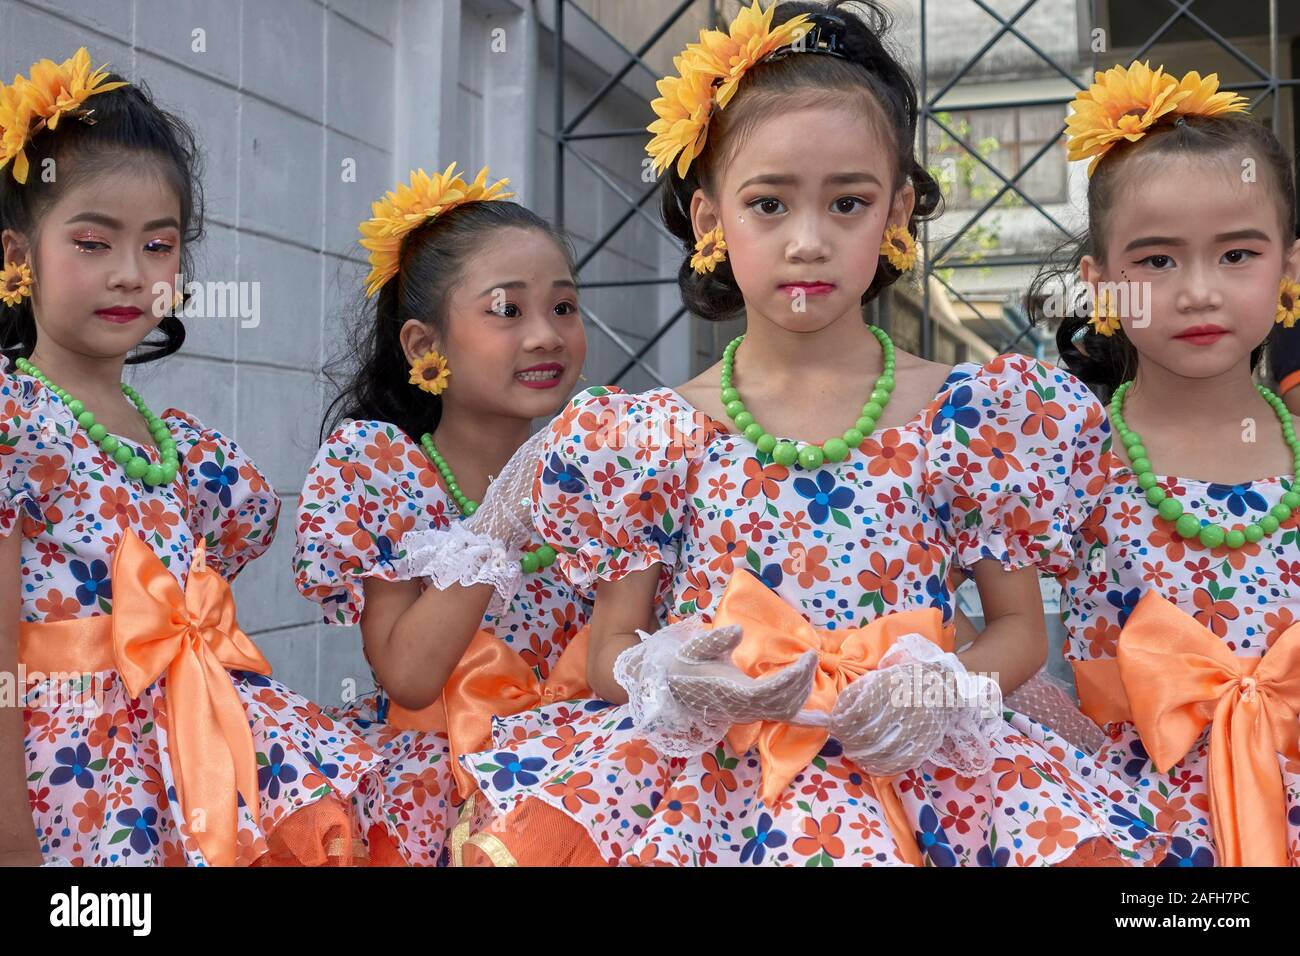 Thailand dancers. Young girls in costume and wearing flowers in their hair, preparing to dance at a festival Stock Photo